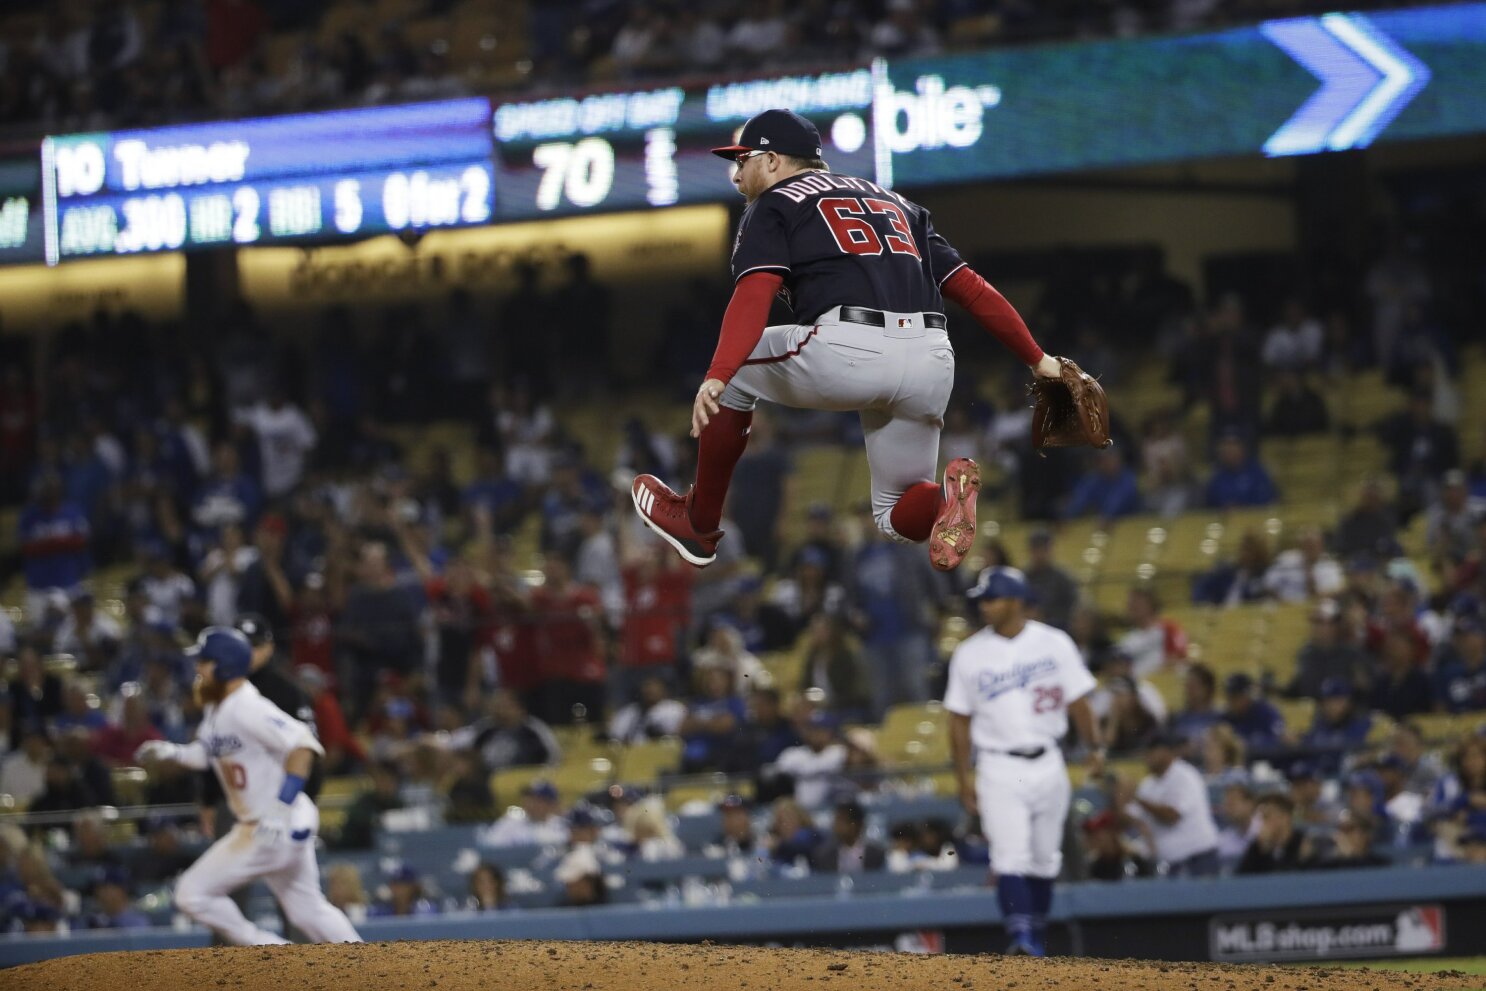 Kendrick slam in 10th lifts Nats over Dodgers 7-3, into NLCS